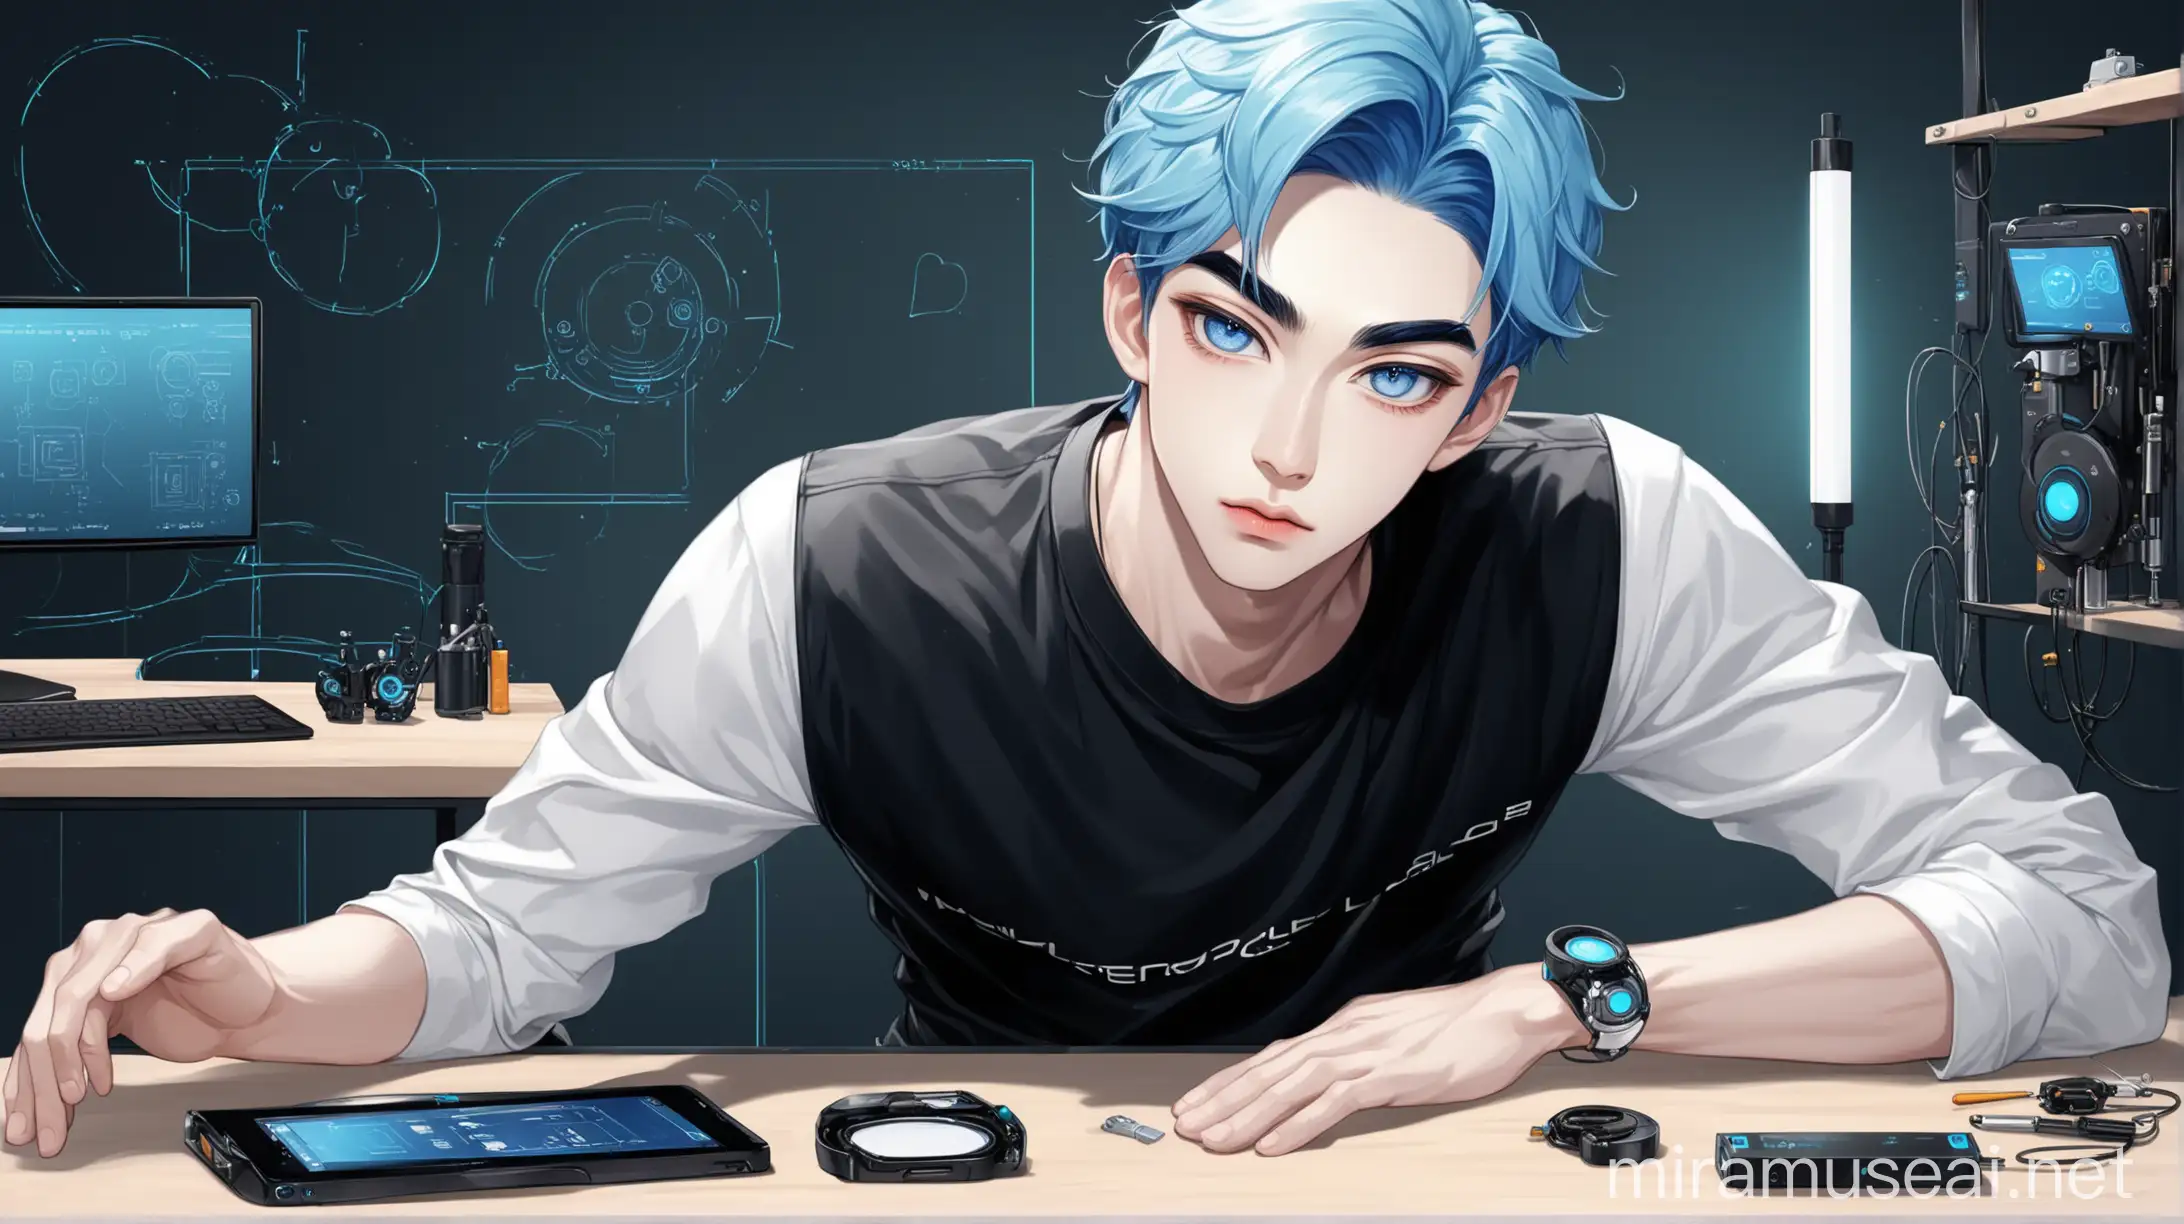 A Korean kpop male idol most attractive handsome elegant looking , facial features:(blue hair, sea blue eyes, straight upturned nose, monolid big doe almond eyes, lower fuller lips, round borderlining heart shaped small face, straight eyebrows ),leaning over a workbench, tinkering with a small device. Playful look
Outfit:(black shirt inner layer , white full sleeve tshirt outer layer , tight skinny black pants 
Background: a modern tech lab 